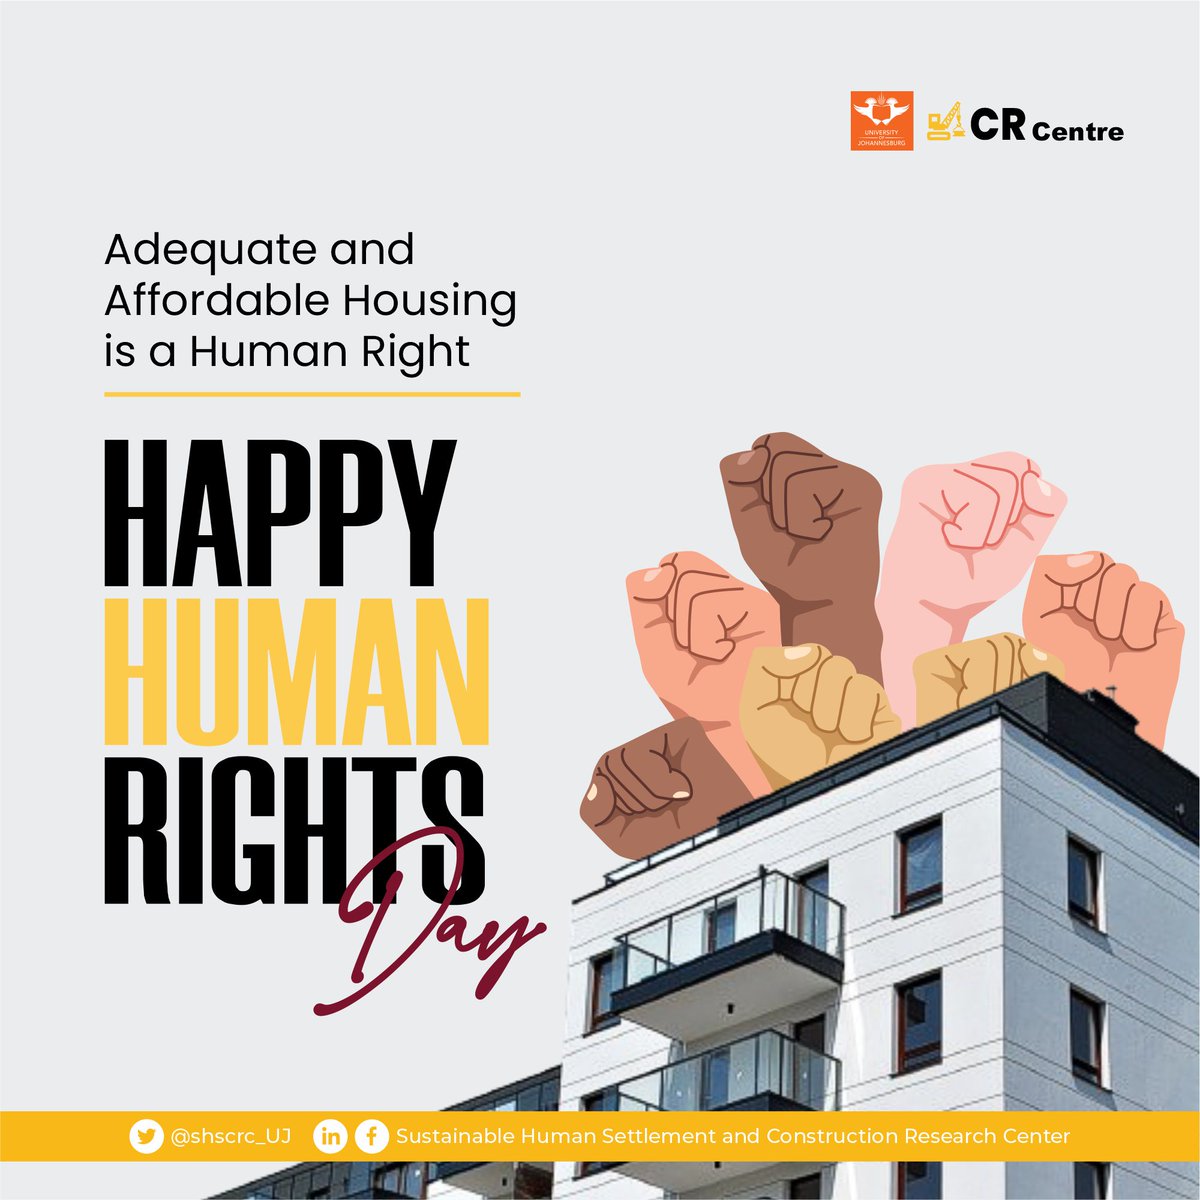 The Director, Prof. Clinton Aigbavboa, along with the Deputy Directors, Faculty, and Scholars of the @shscrc_UJ, are at the forefront of commemorating today's #HumanRightDay, underscoring our commitment to #HumanRights.